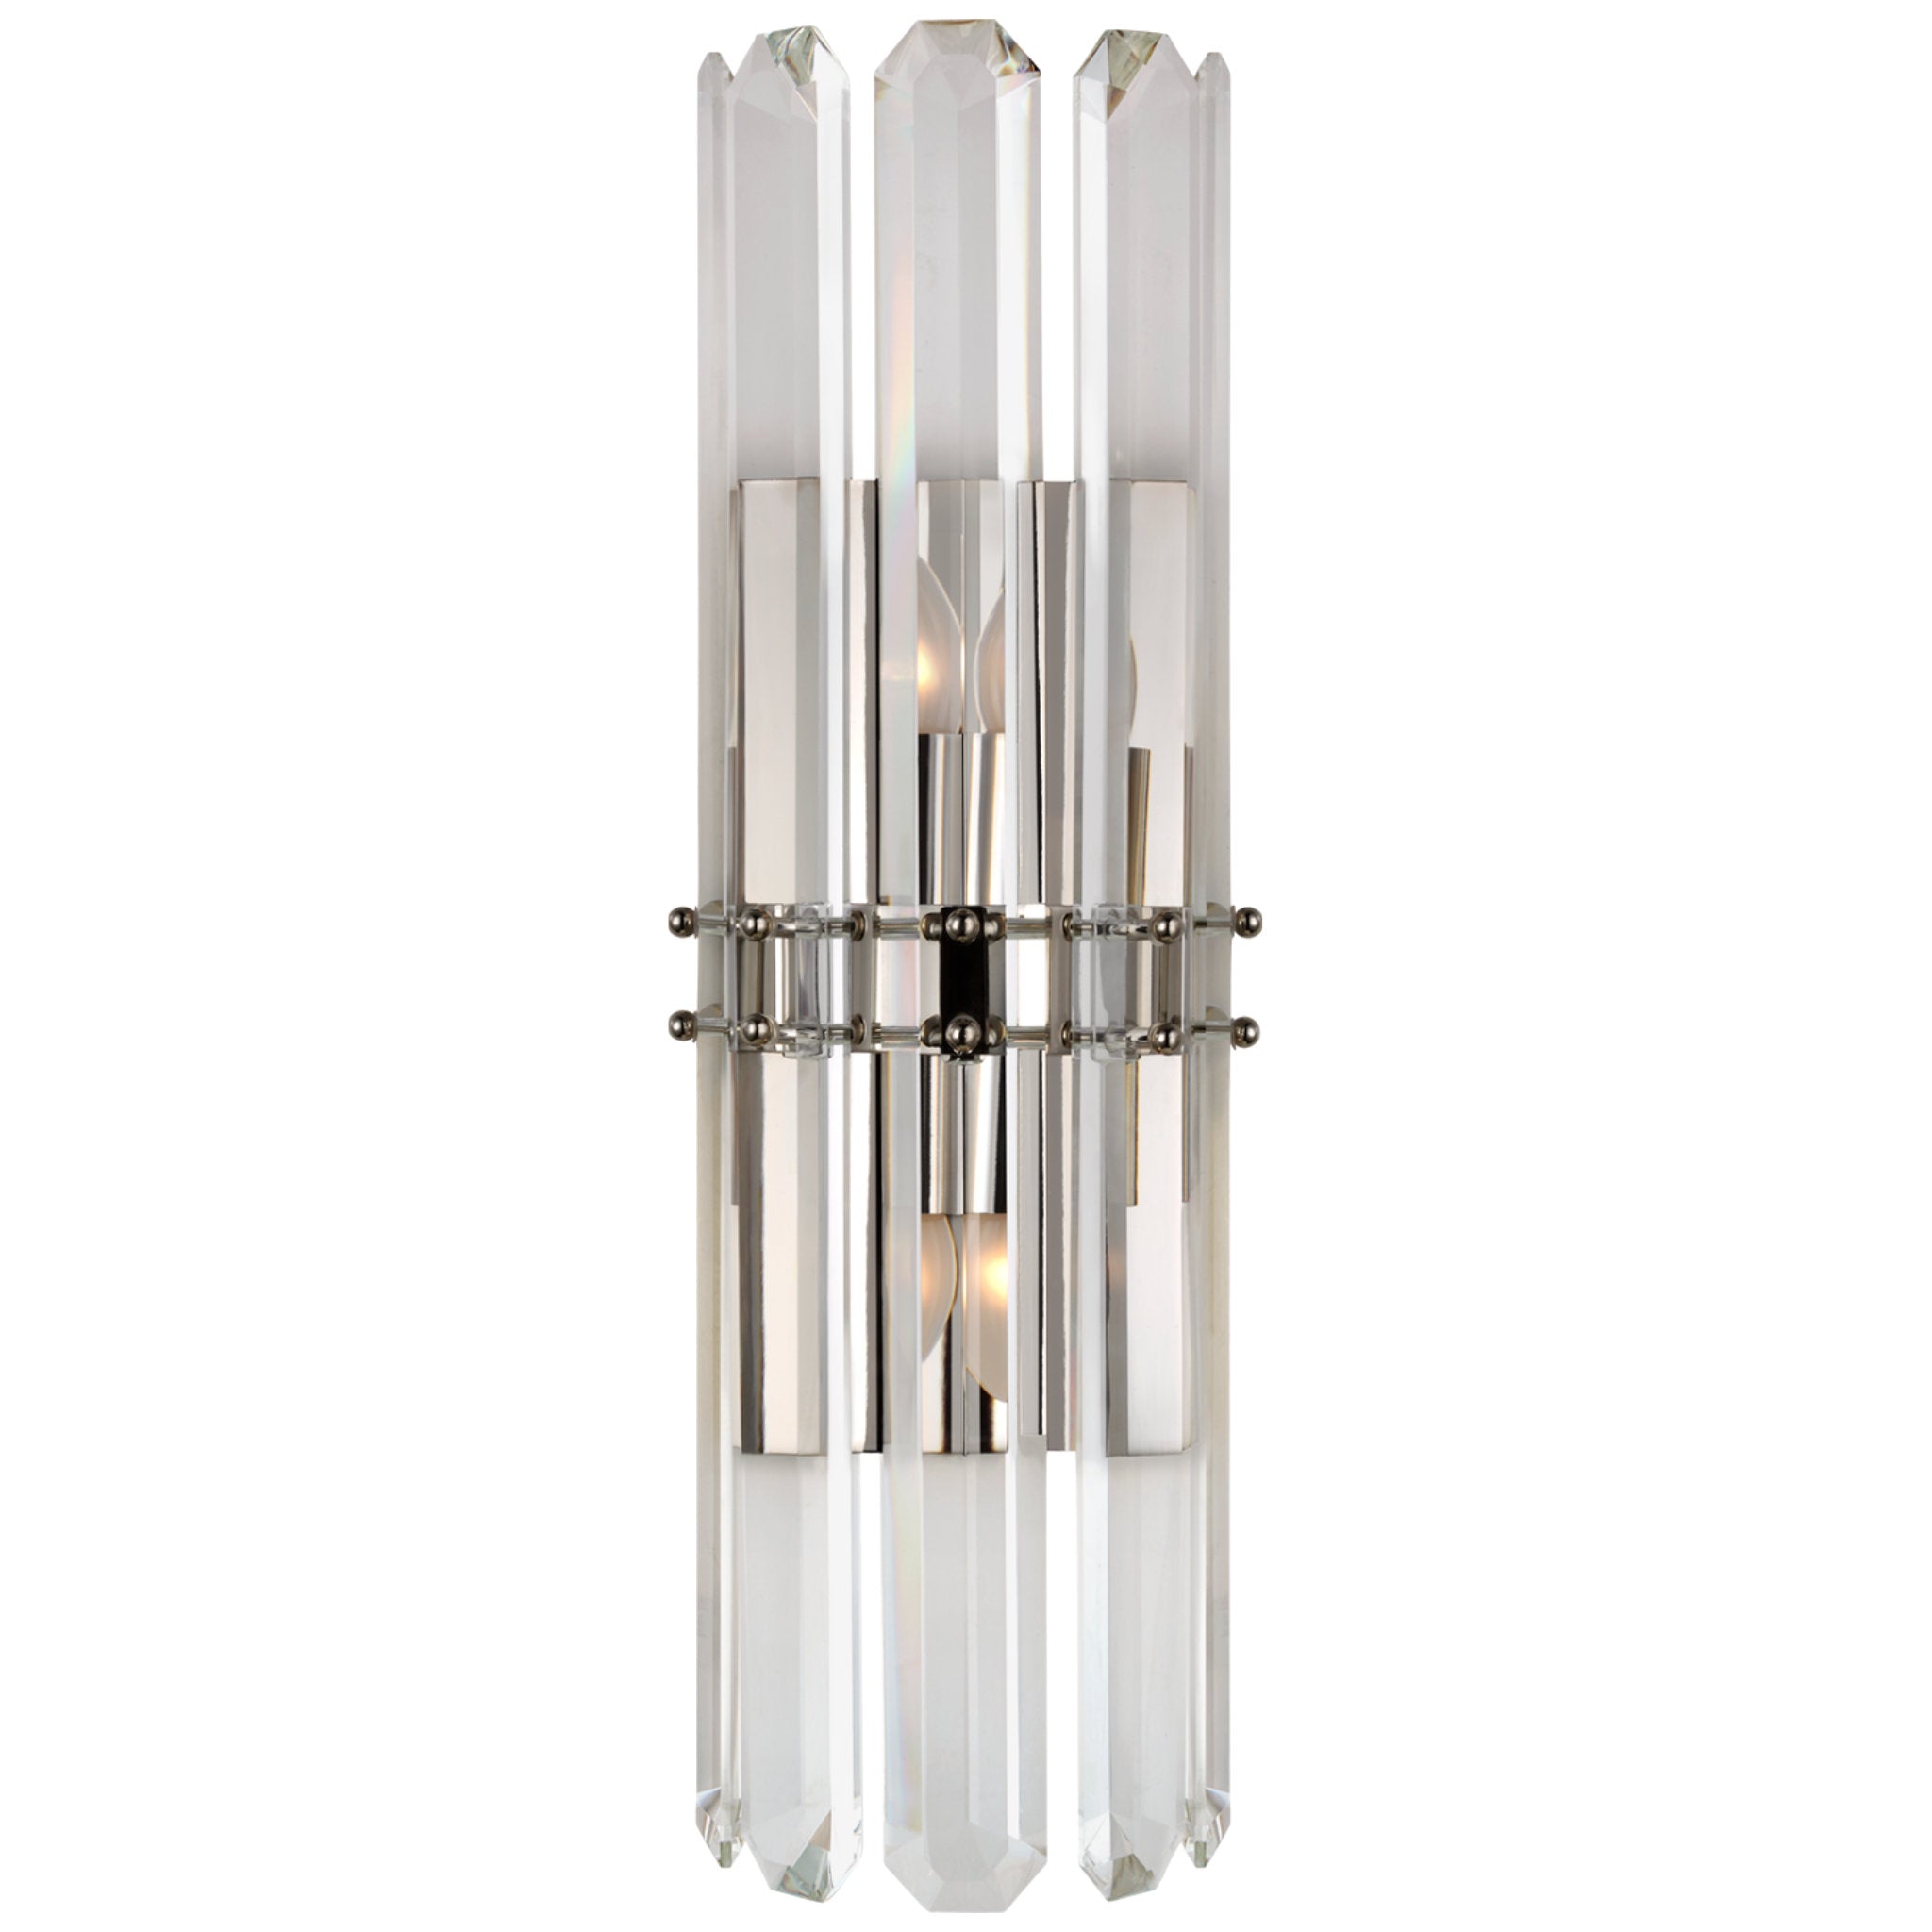 AERIN Bonnington Tall Sconce in Polished Nickel